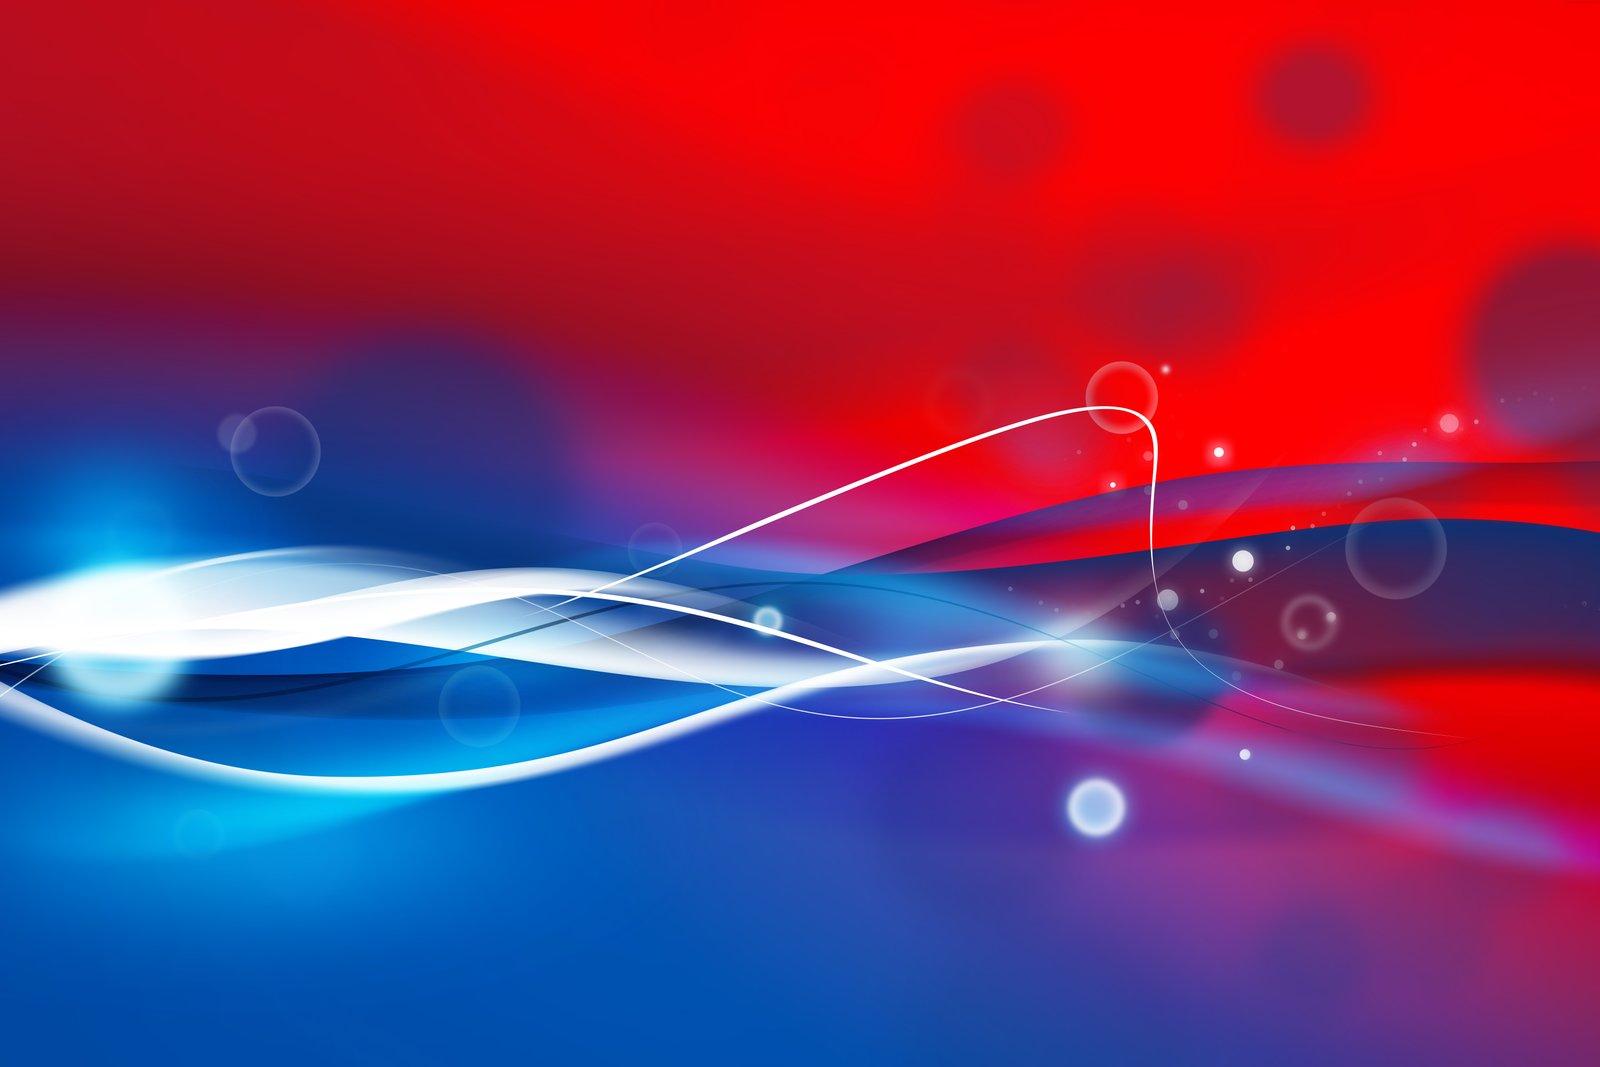 Abstract red and blue background | PSDGraphics